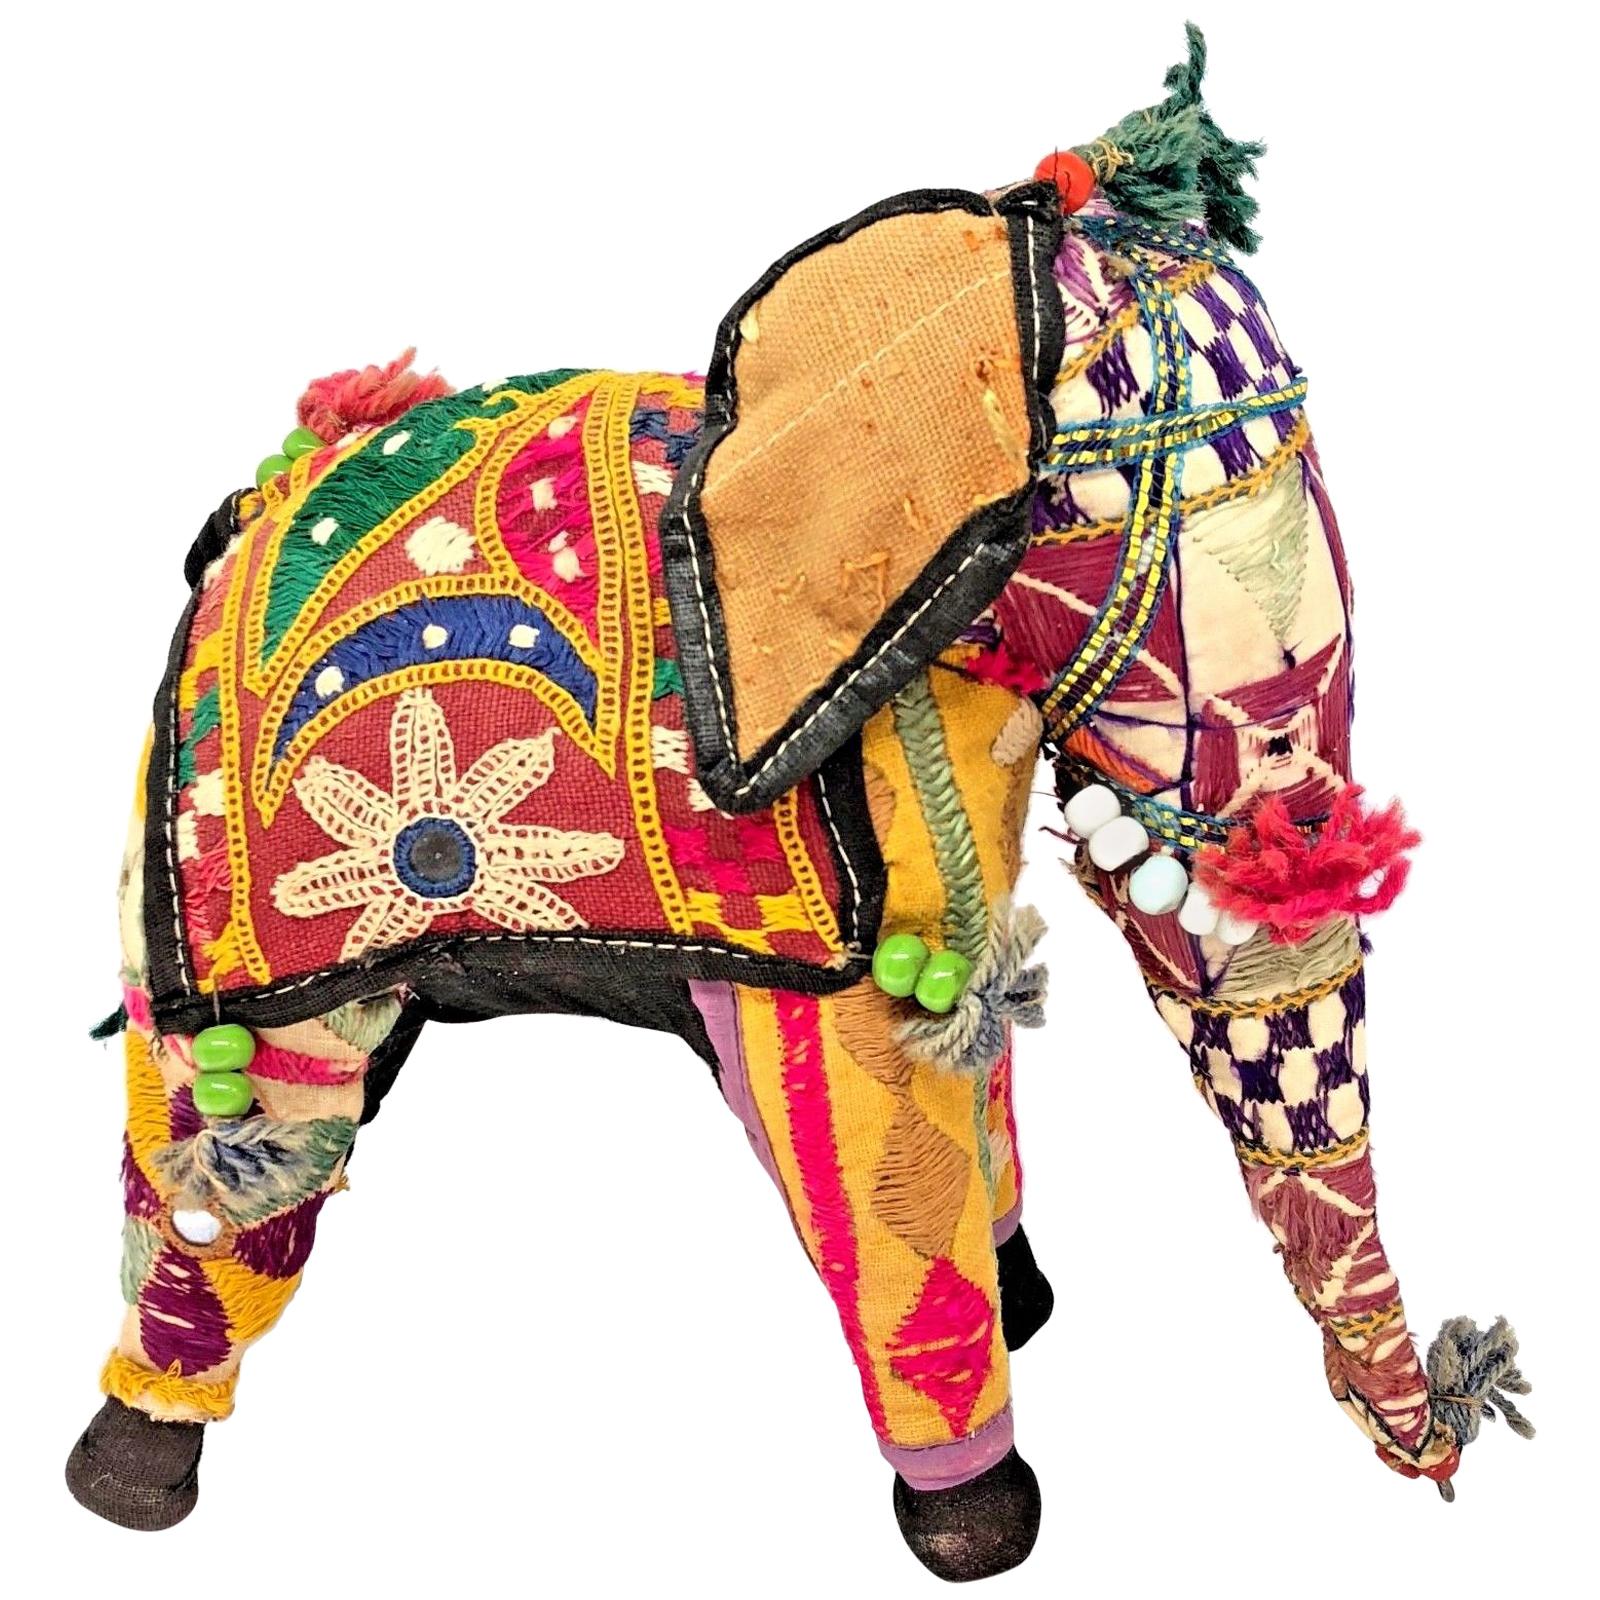 Handcrafted Vintage Stuffed Fabric Embroidered Elephant, India